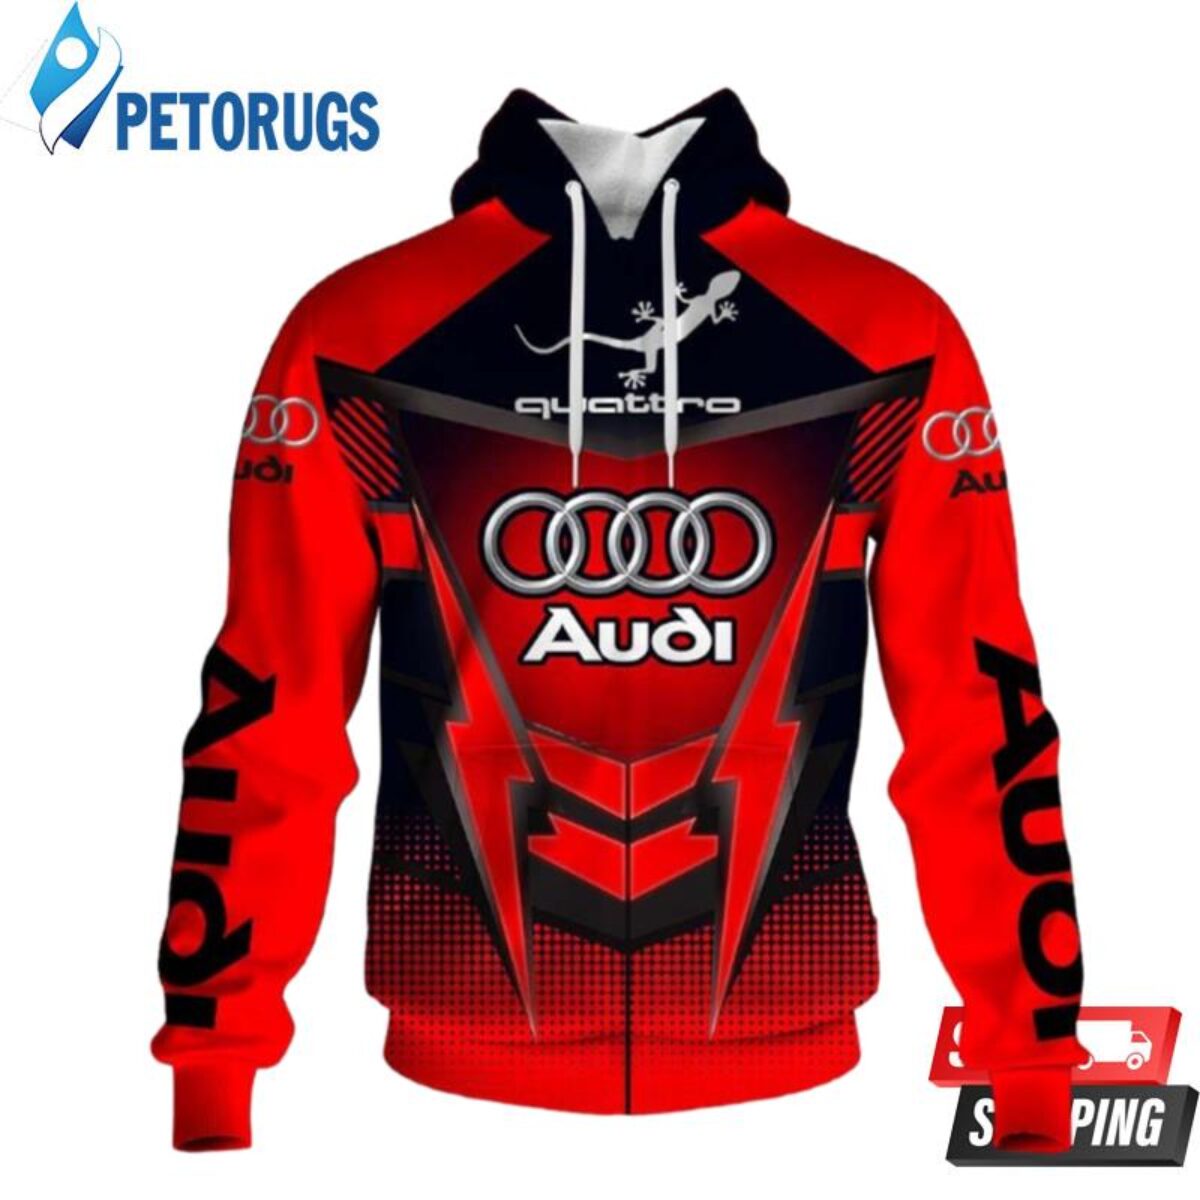 3D New York Hoodie, Shop Now at Pseudio!